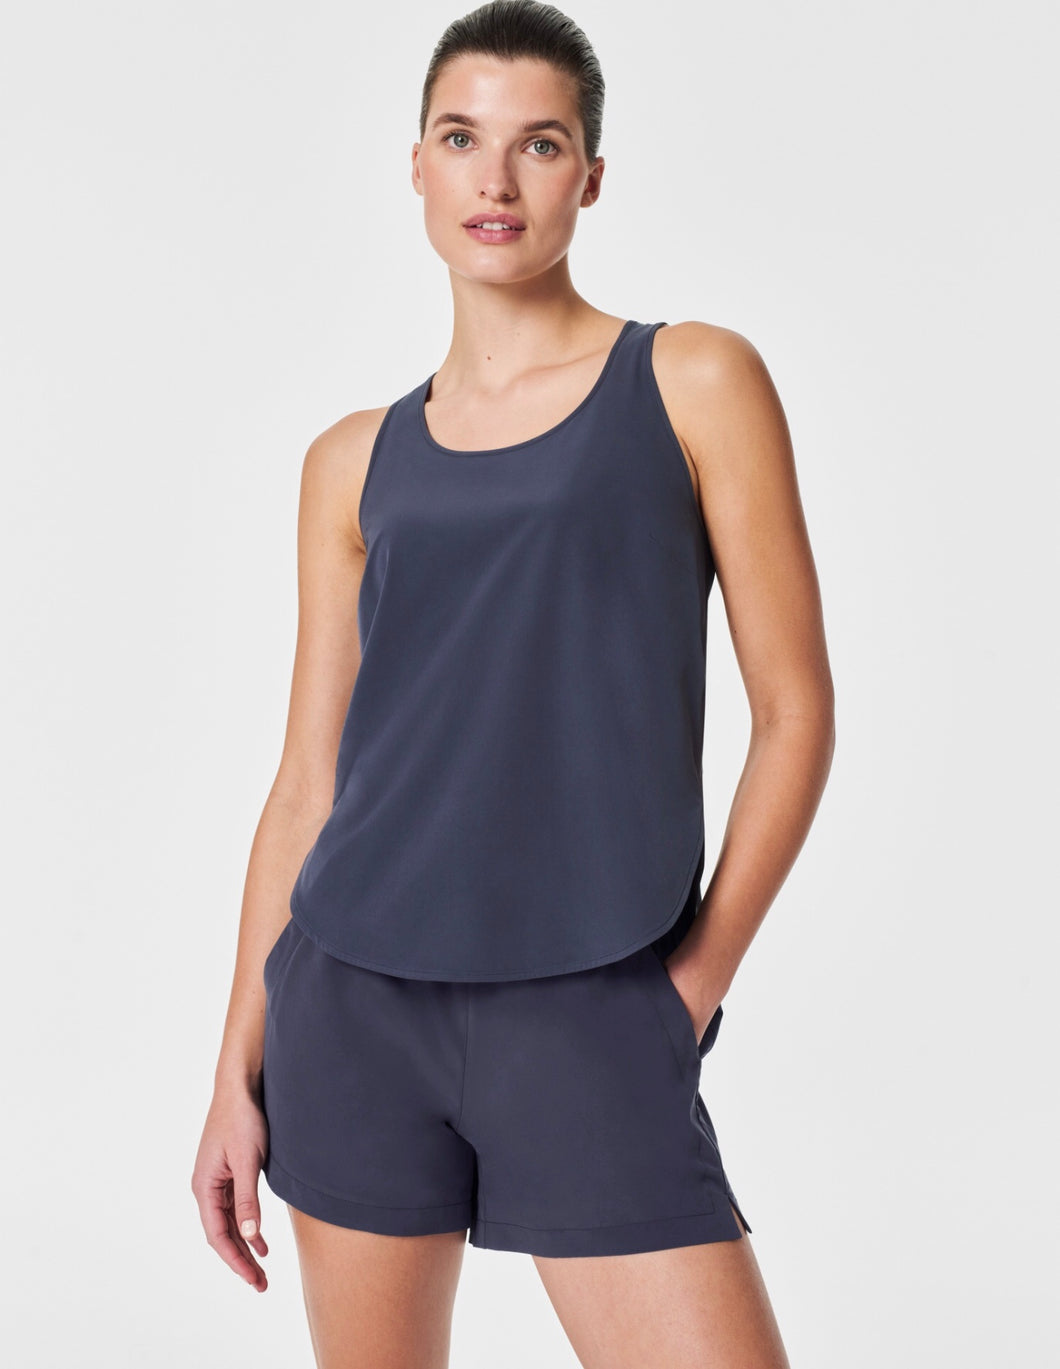 Spanx: Out of Office Shell Tank in Dark Storm